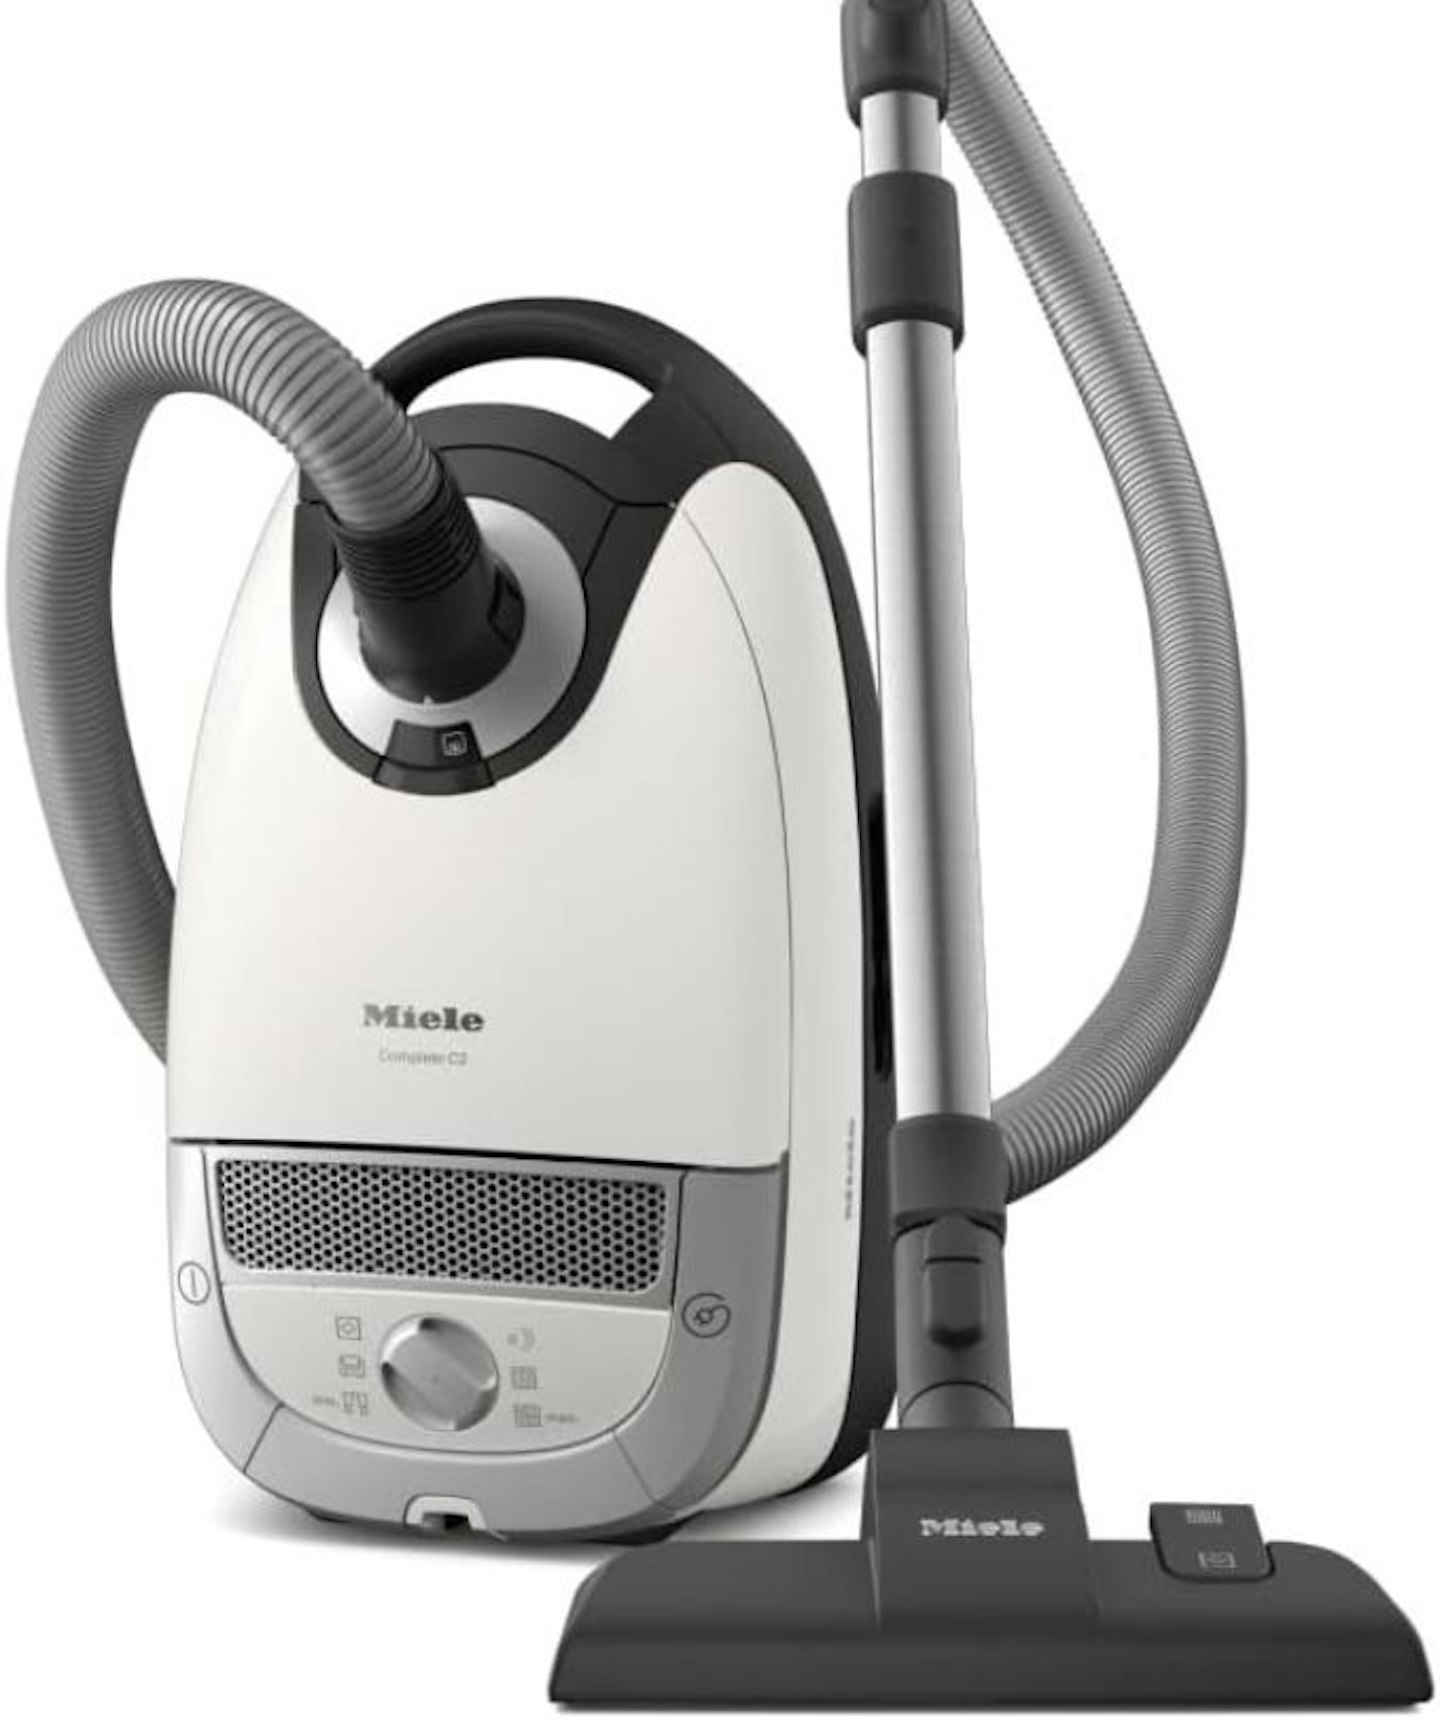 Miele 12034890 Complete C2 PowerLine Bagged Cylinder Vacuum Cleaner